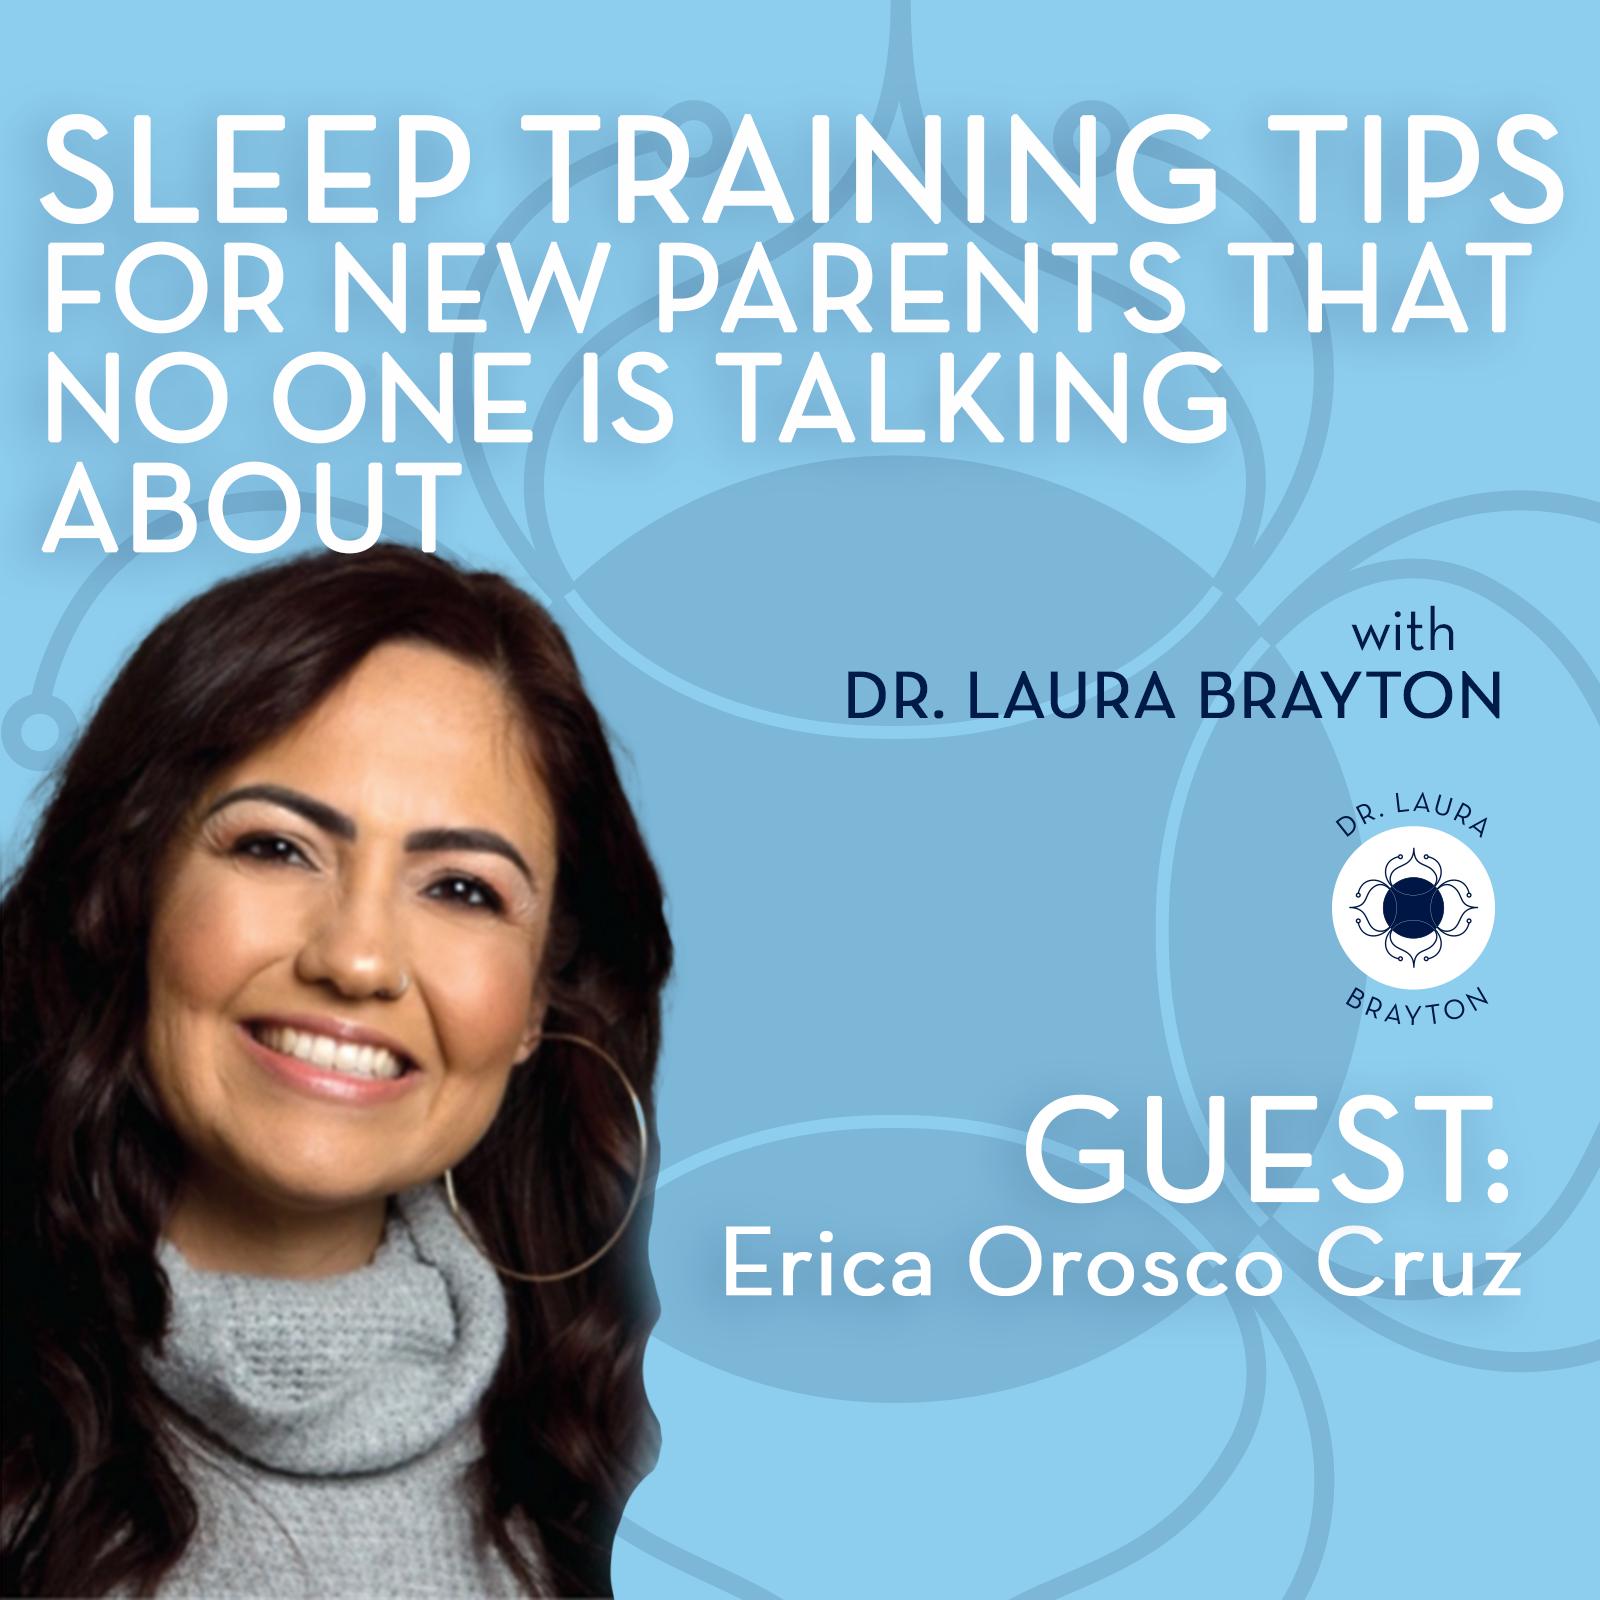 Sleep Training Tips for New Parents that No One is Talking About with Erica Orosco Cruz